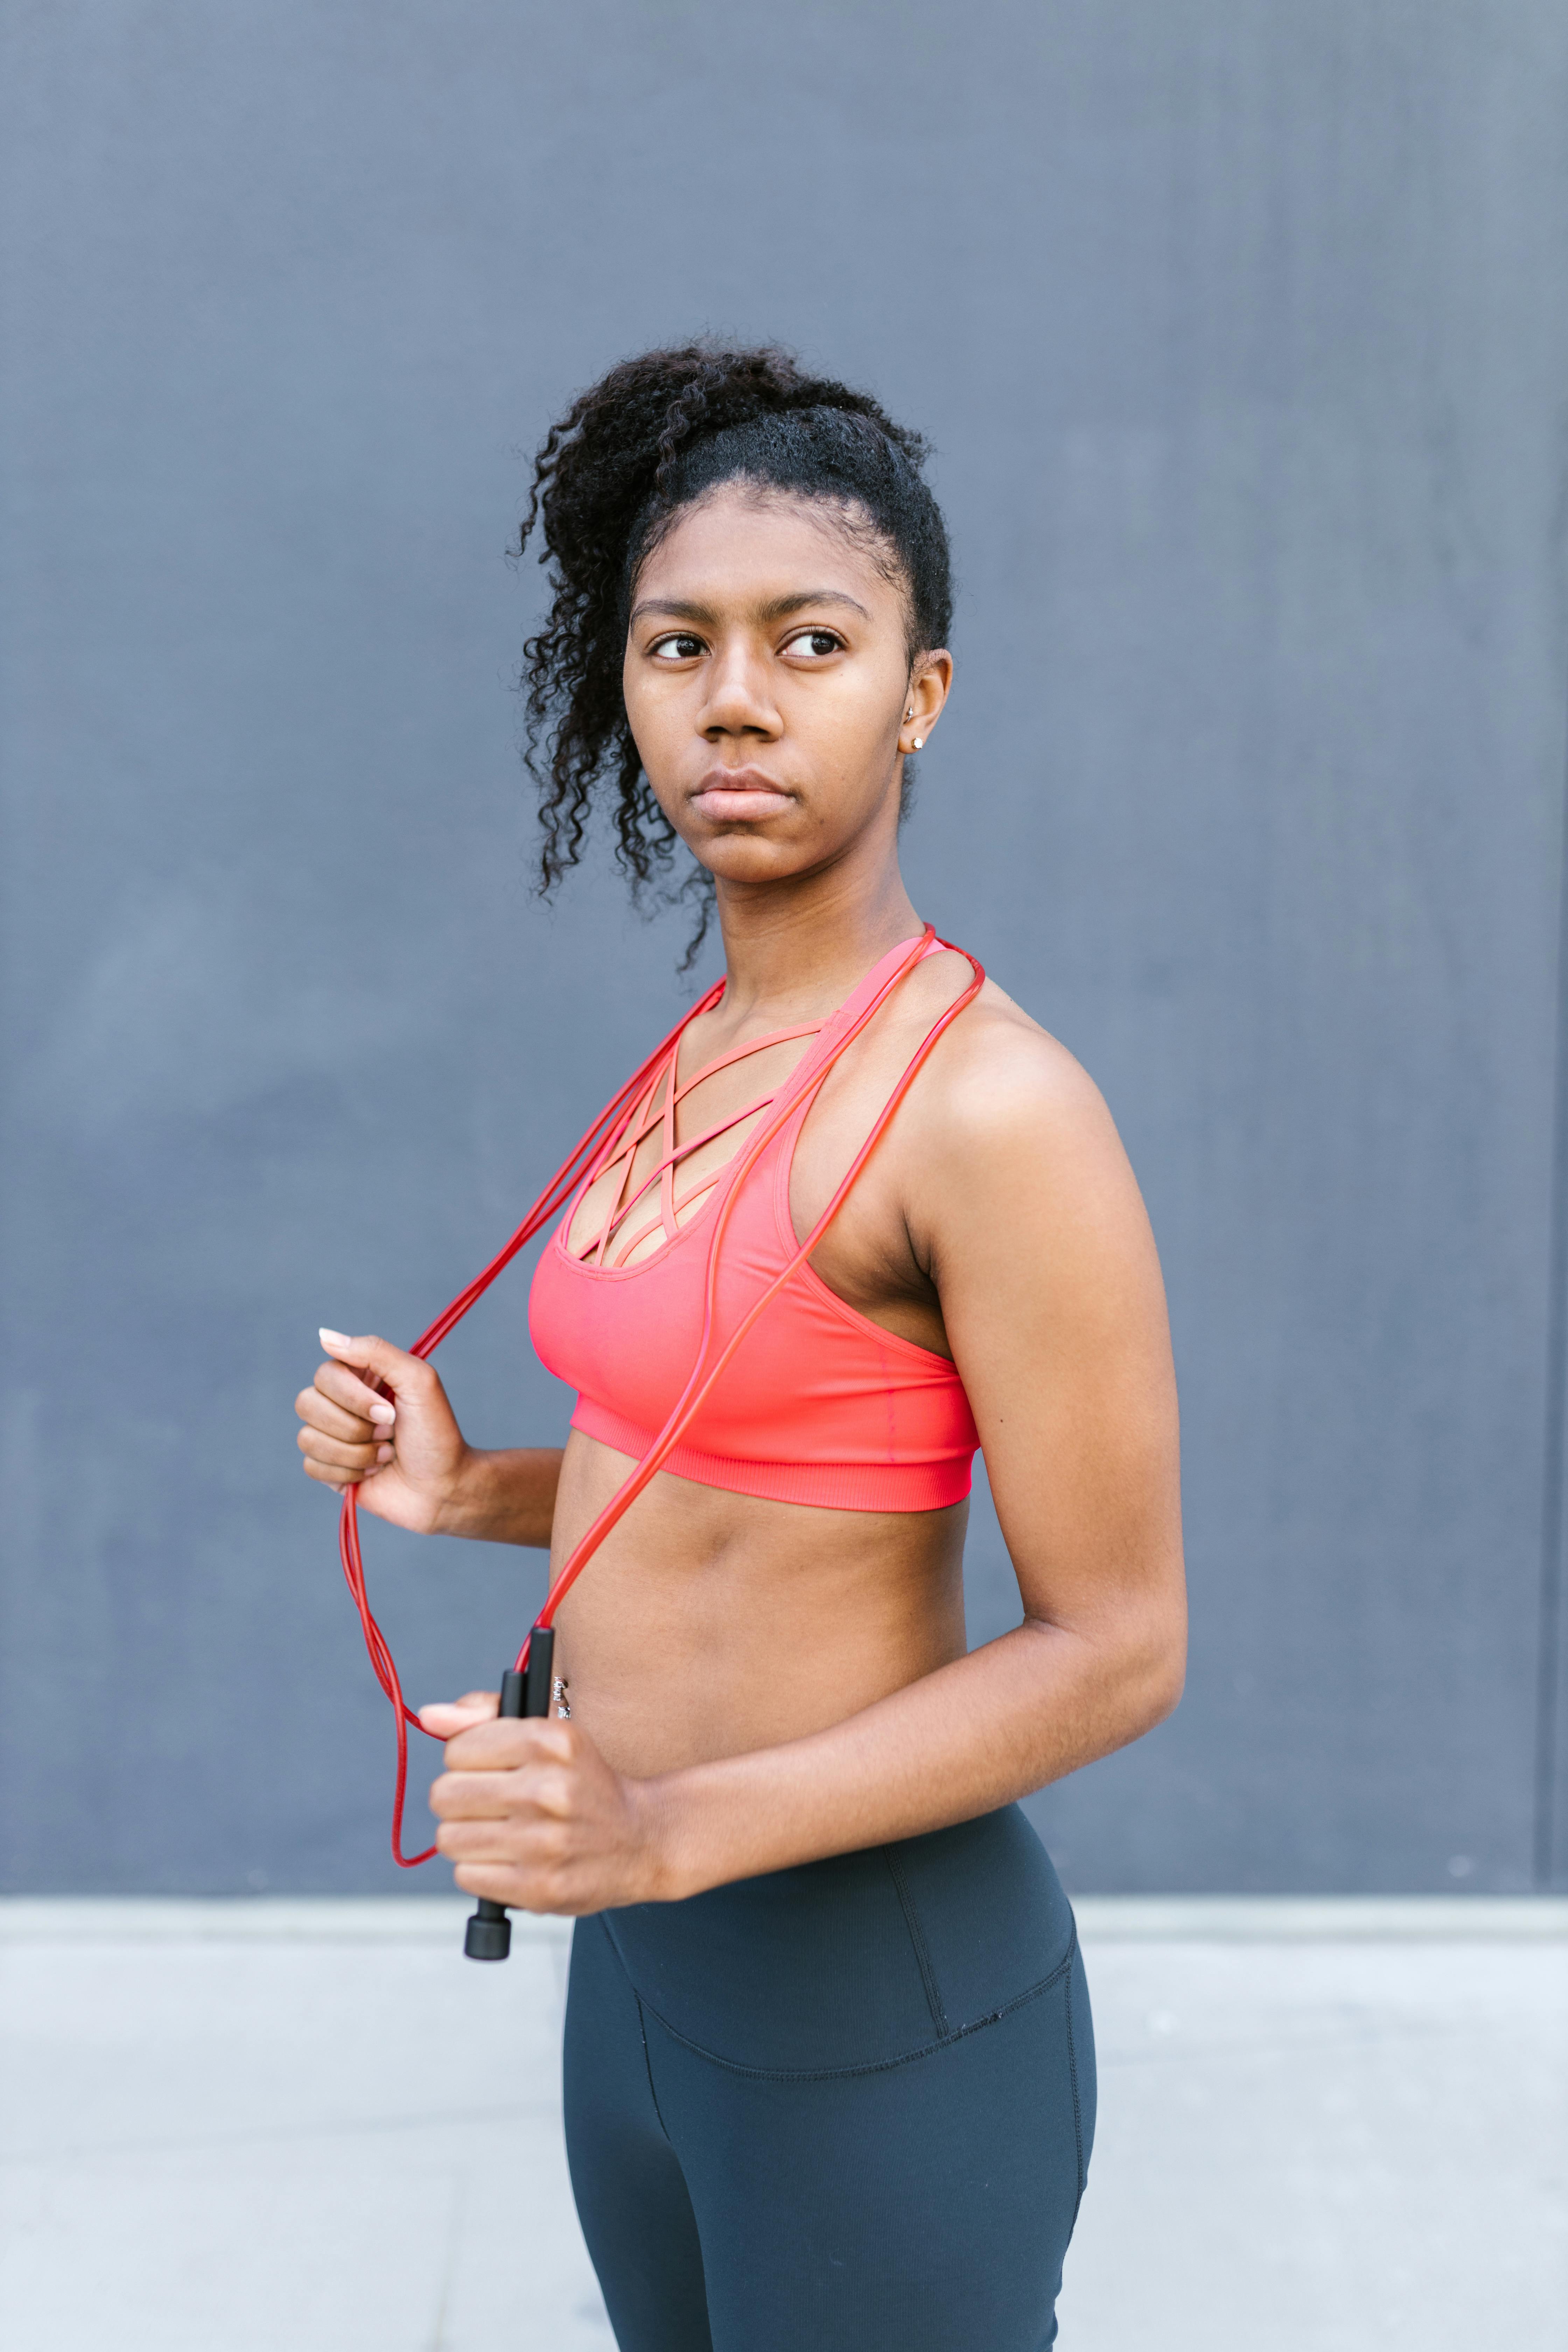 Woman Wearing Red Sports Bra Holding Skipping Ropes Smiling · Free